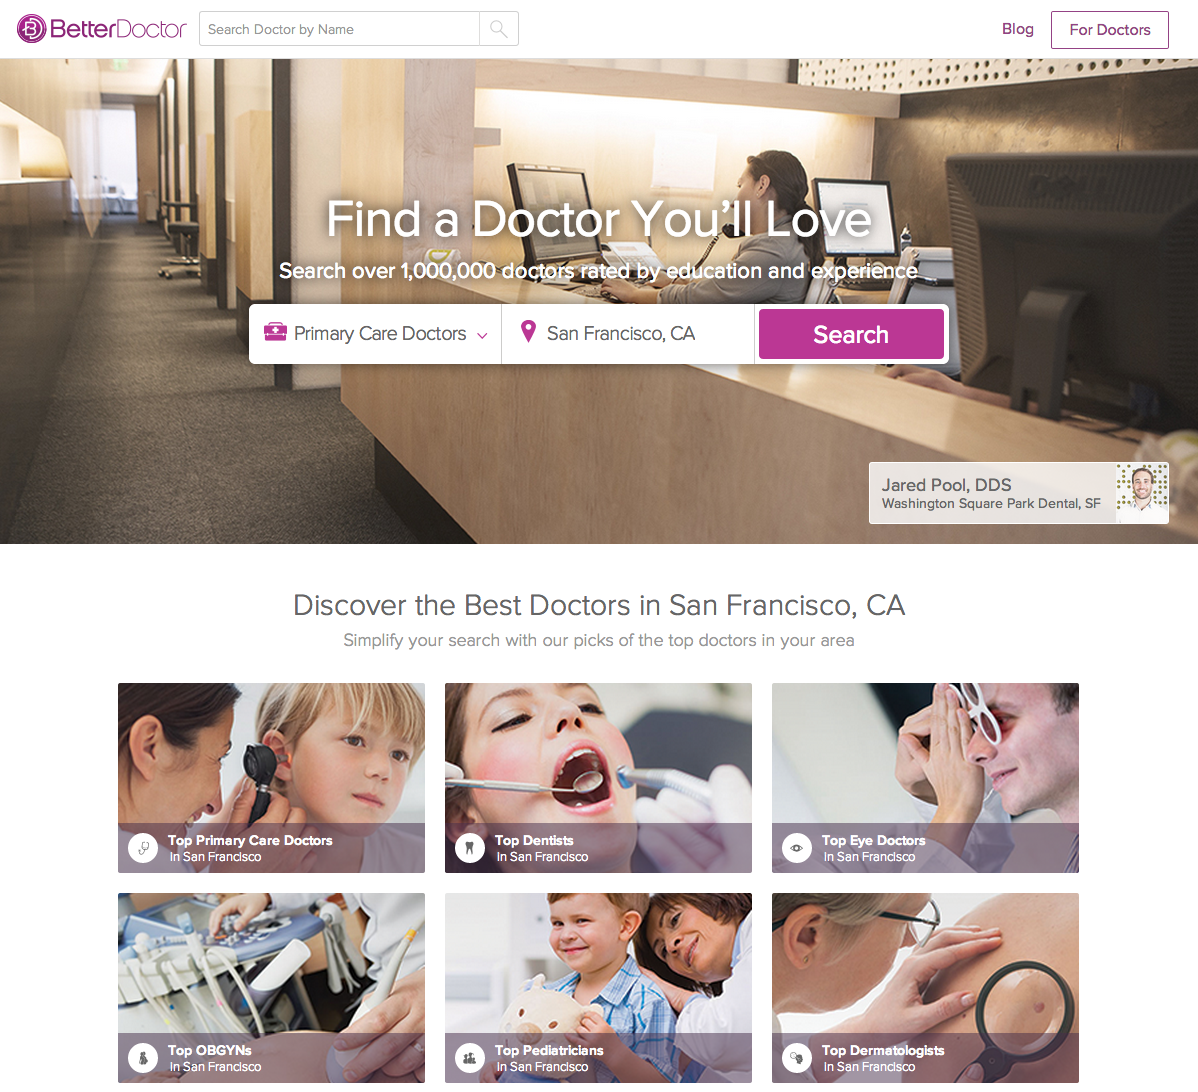 BetterDoctor home page - Find a doctor you'll love